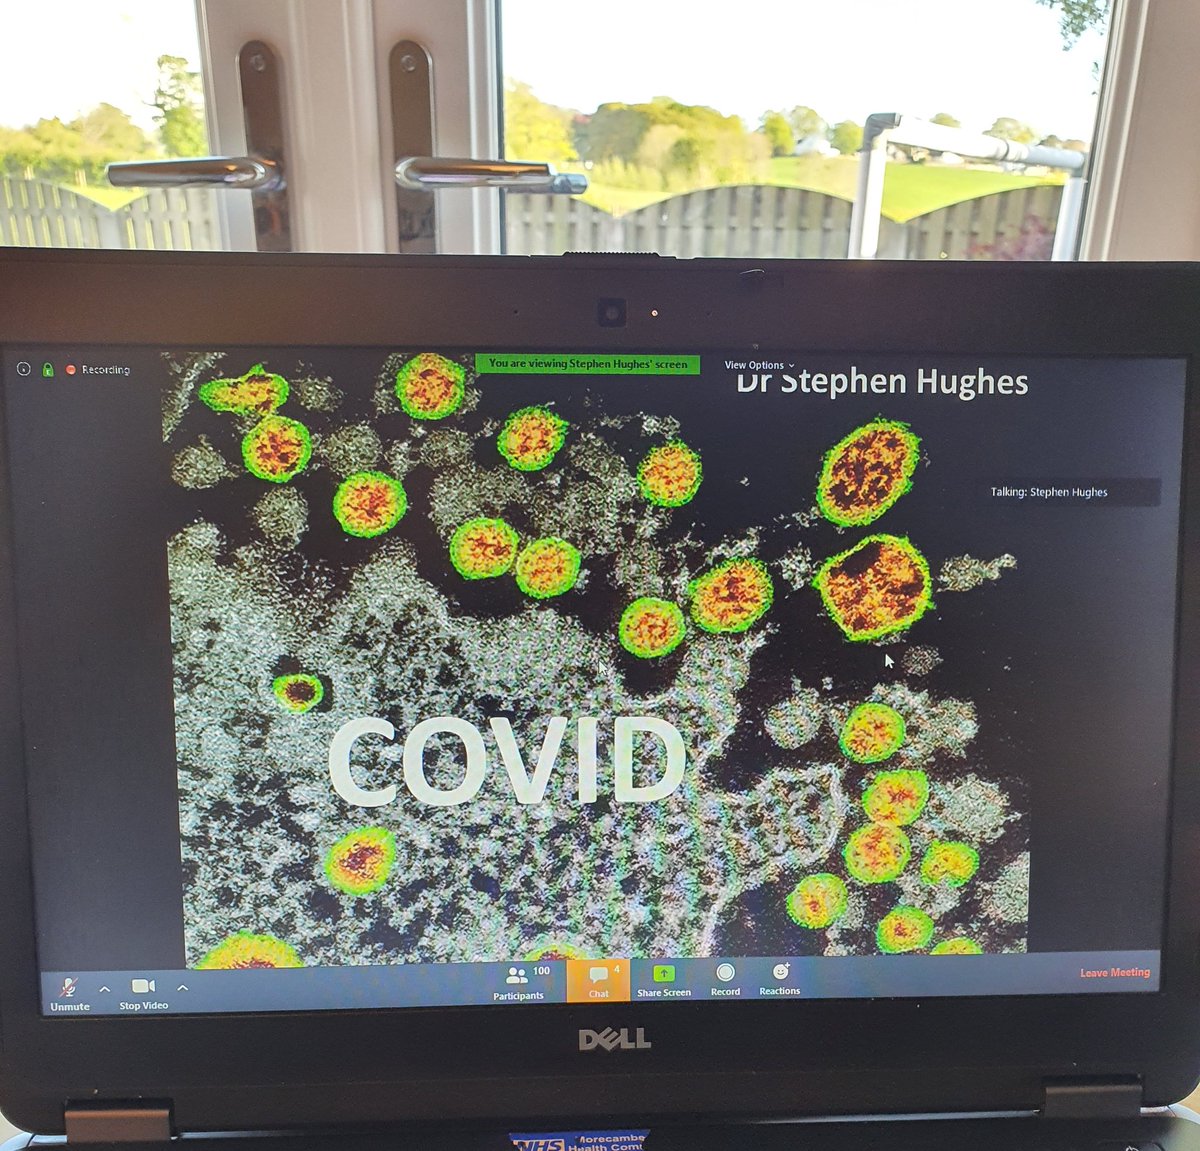 @RMCHtrainees massive tnku 2 Dr Stephen Hughes Cons Paediatric Immunologist @RMCHosp 4 truly excellent 1st ever virtual grand round on #ImmunologyofCoronaVirus #sharedlearning #trueup2dateinformation #networking #paediatricteaching #lifelonglearninginpractice #childhealthmatters